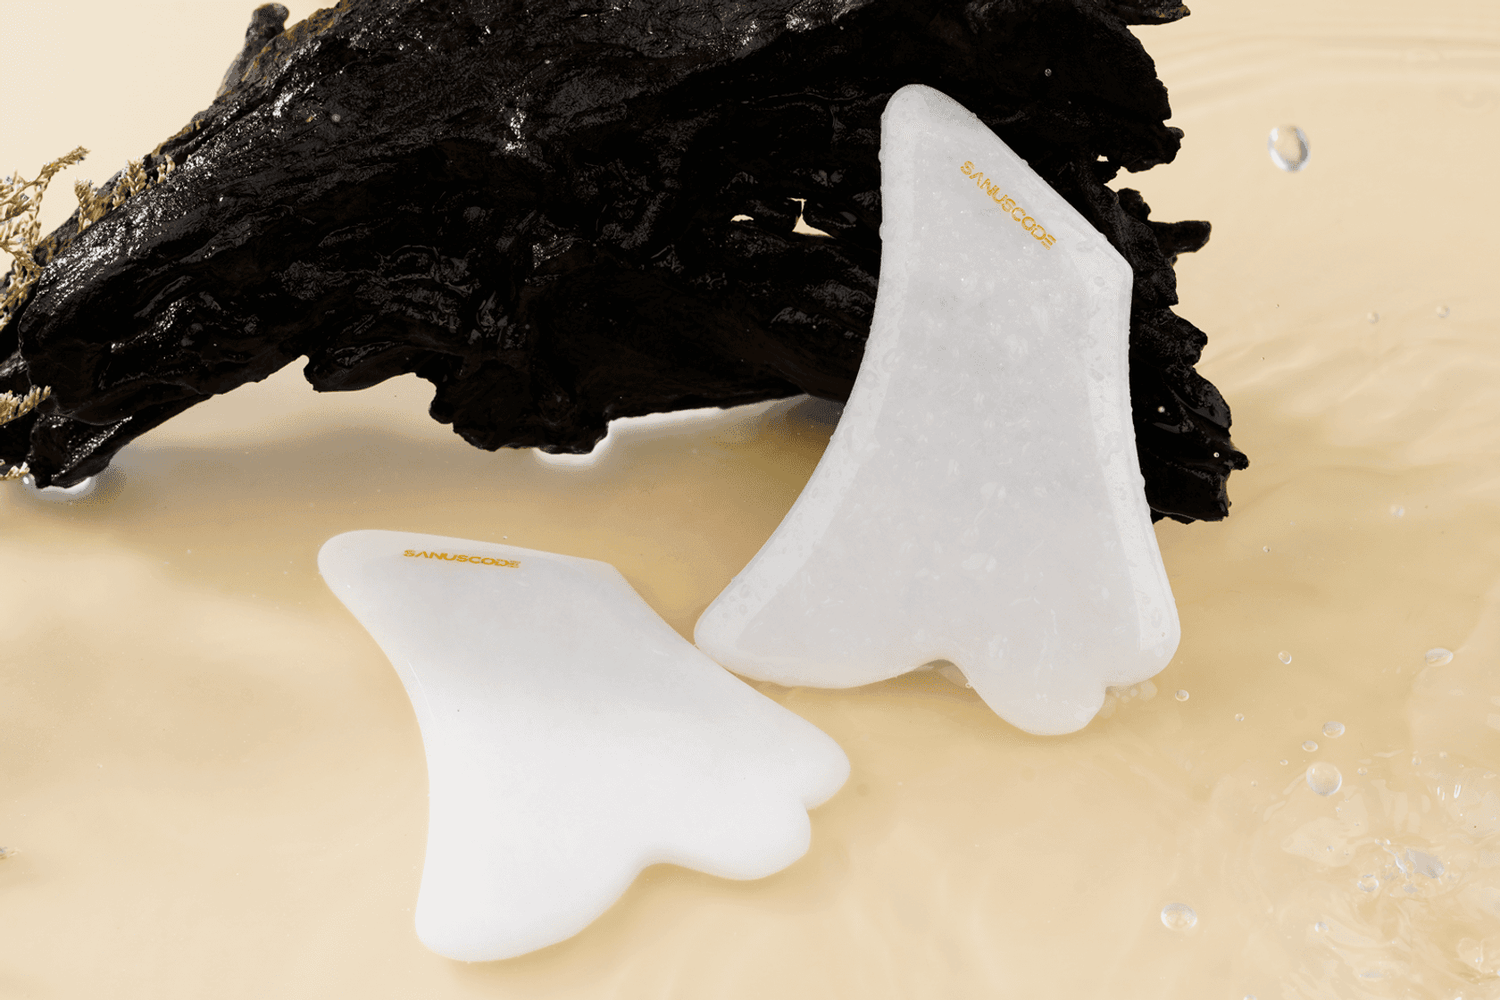 two white jade gua sha stones in front of sandalwood floating in water, beige background